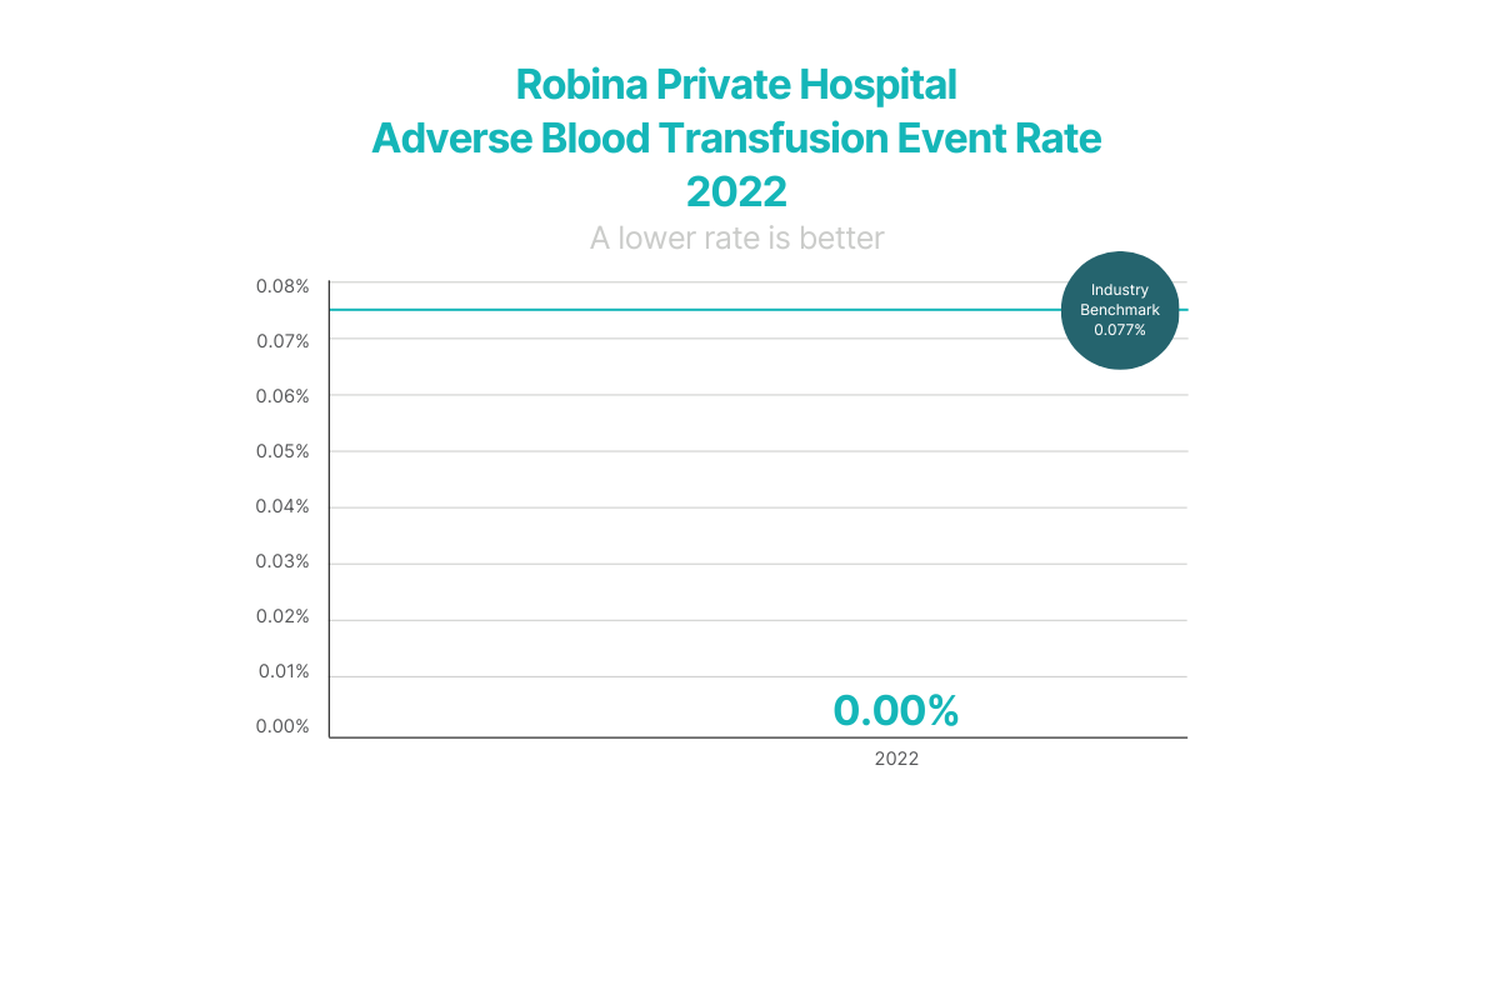 Adverse Blood Transfusion Event Rate